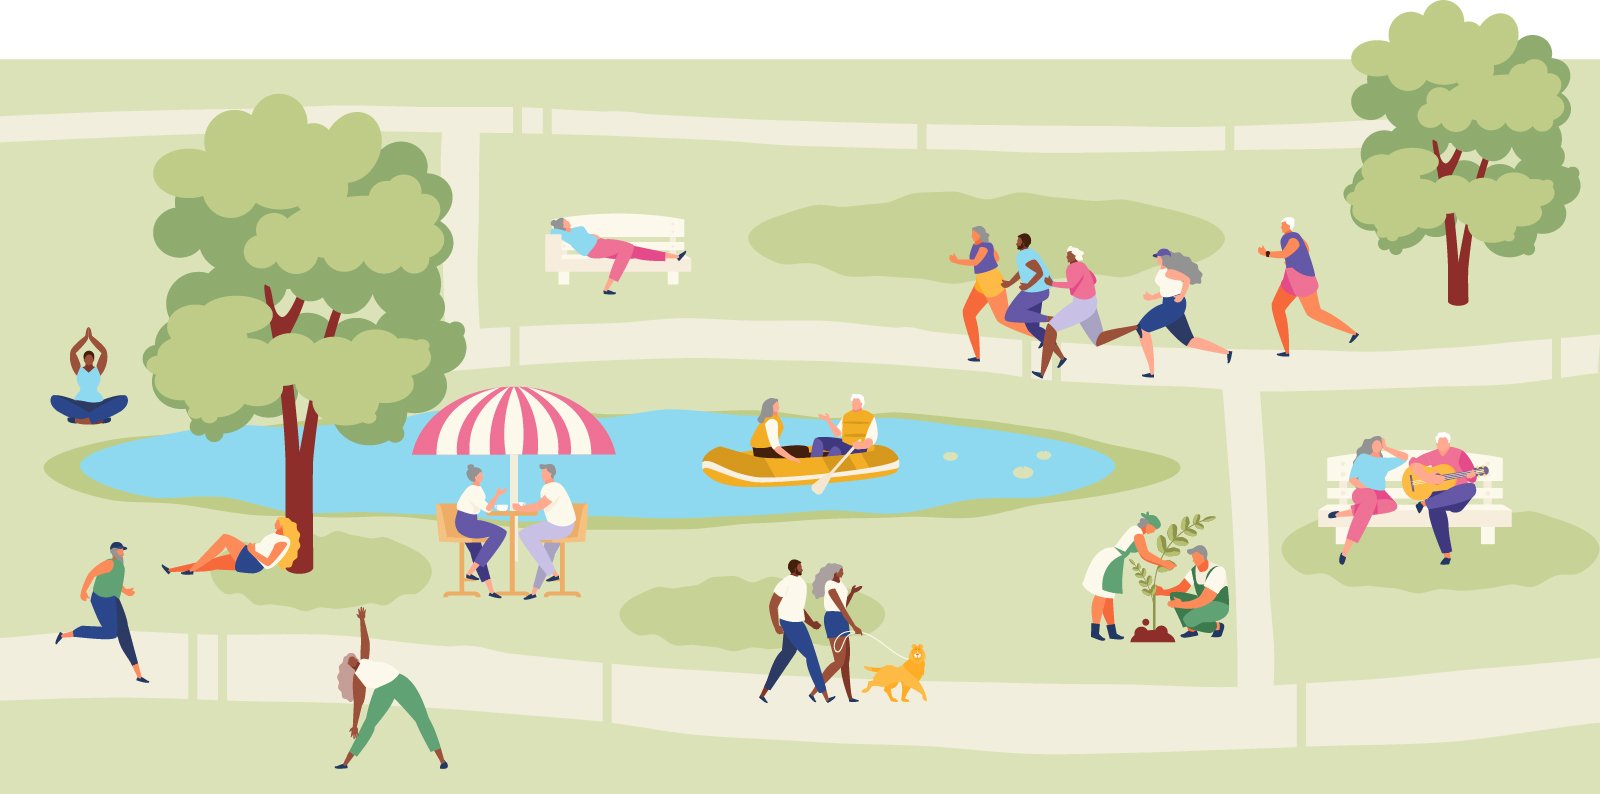 Illustration of park with a lake and walking trails